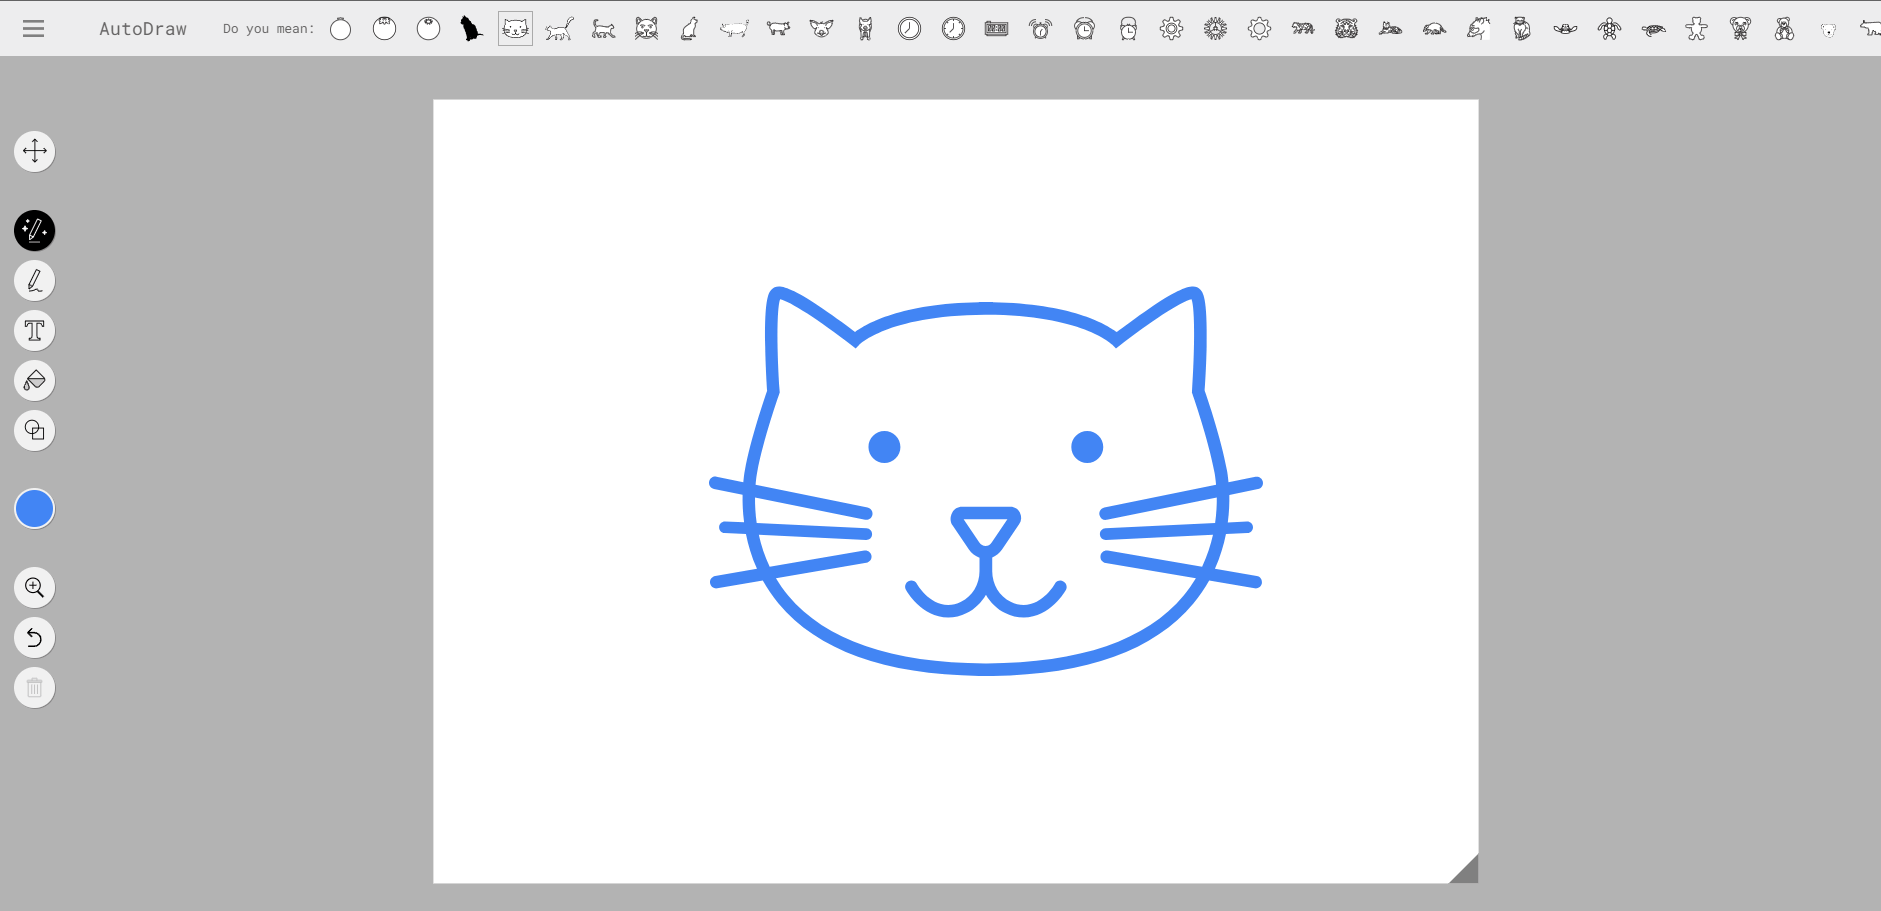 A simple line drawing of a blue cat in the Autoraw interface